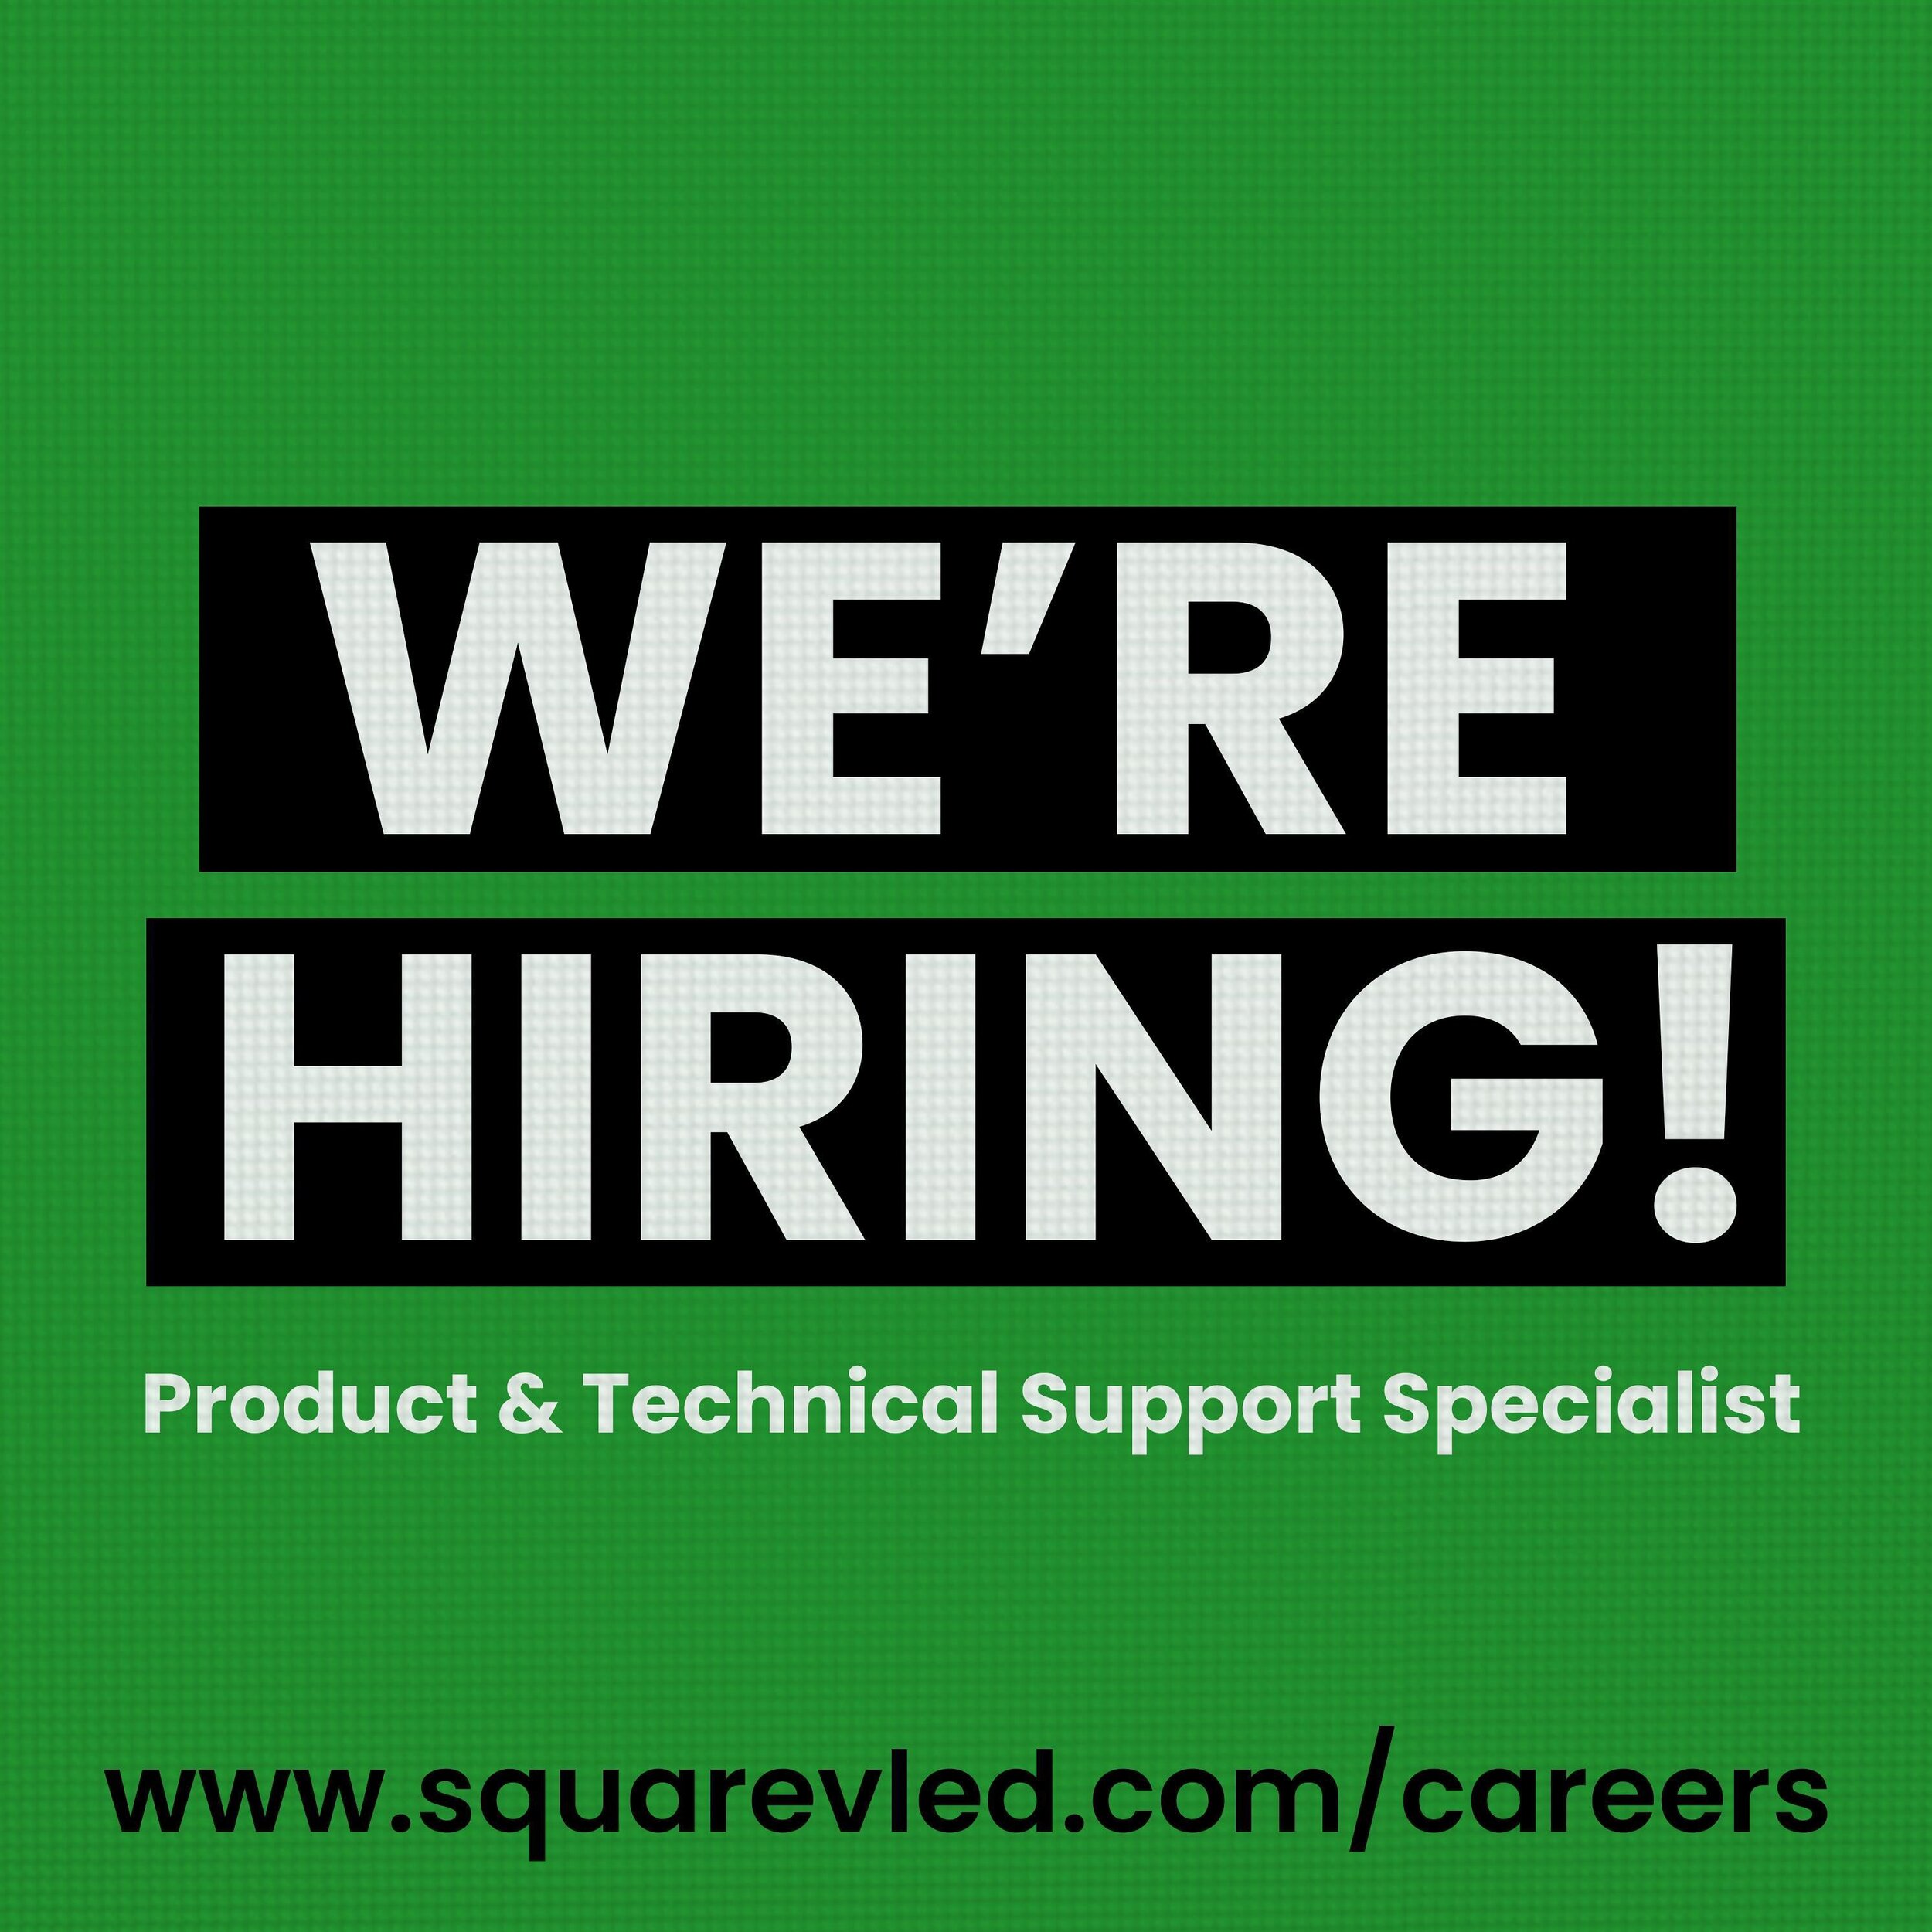 We&rsquo;re searching for the right individual to join our team as a full-time Product &amp; Customer Support Specialist! Apply + see a full Job Description at squarevled.com/careers (link in profile, too) .
.
.
.
.
#novastar #novastarled #ledwall #l